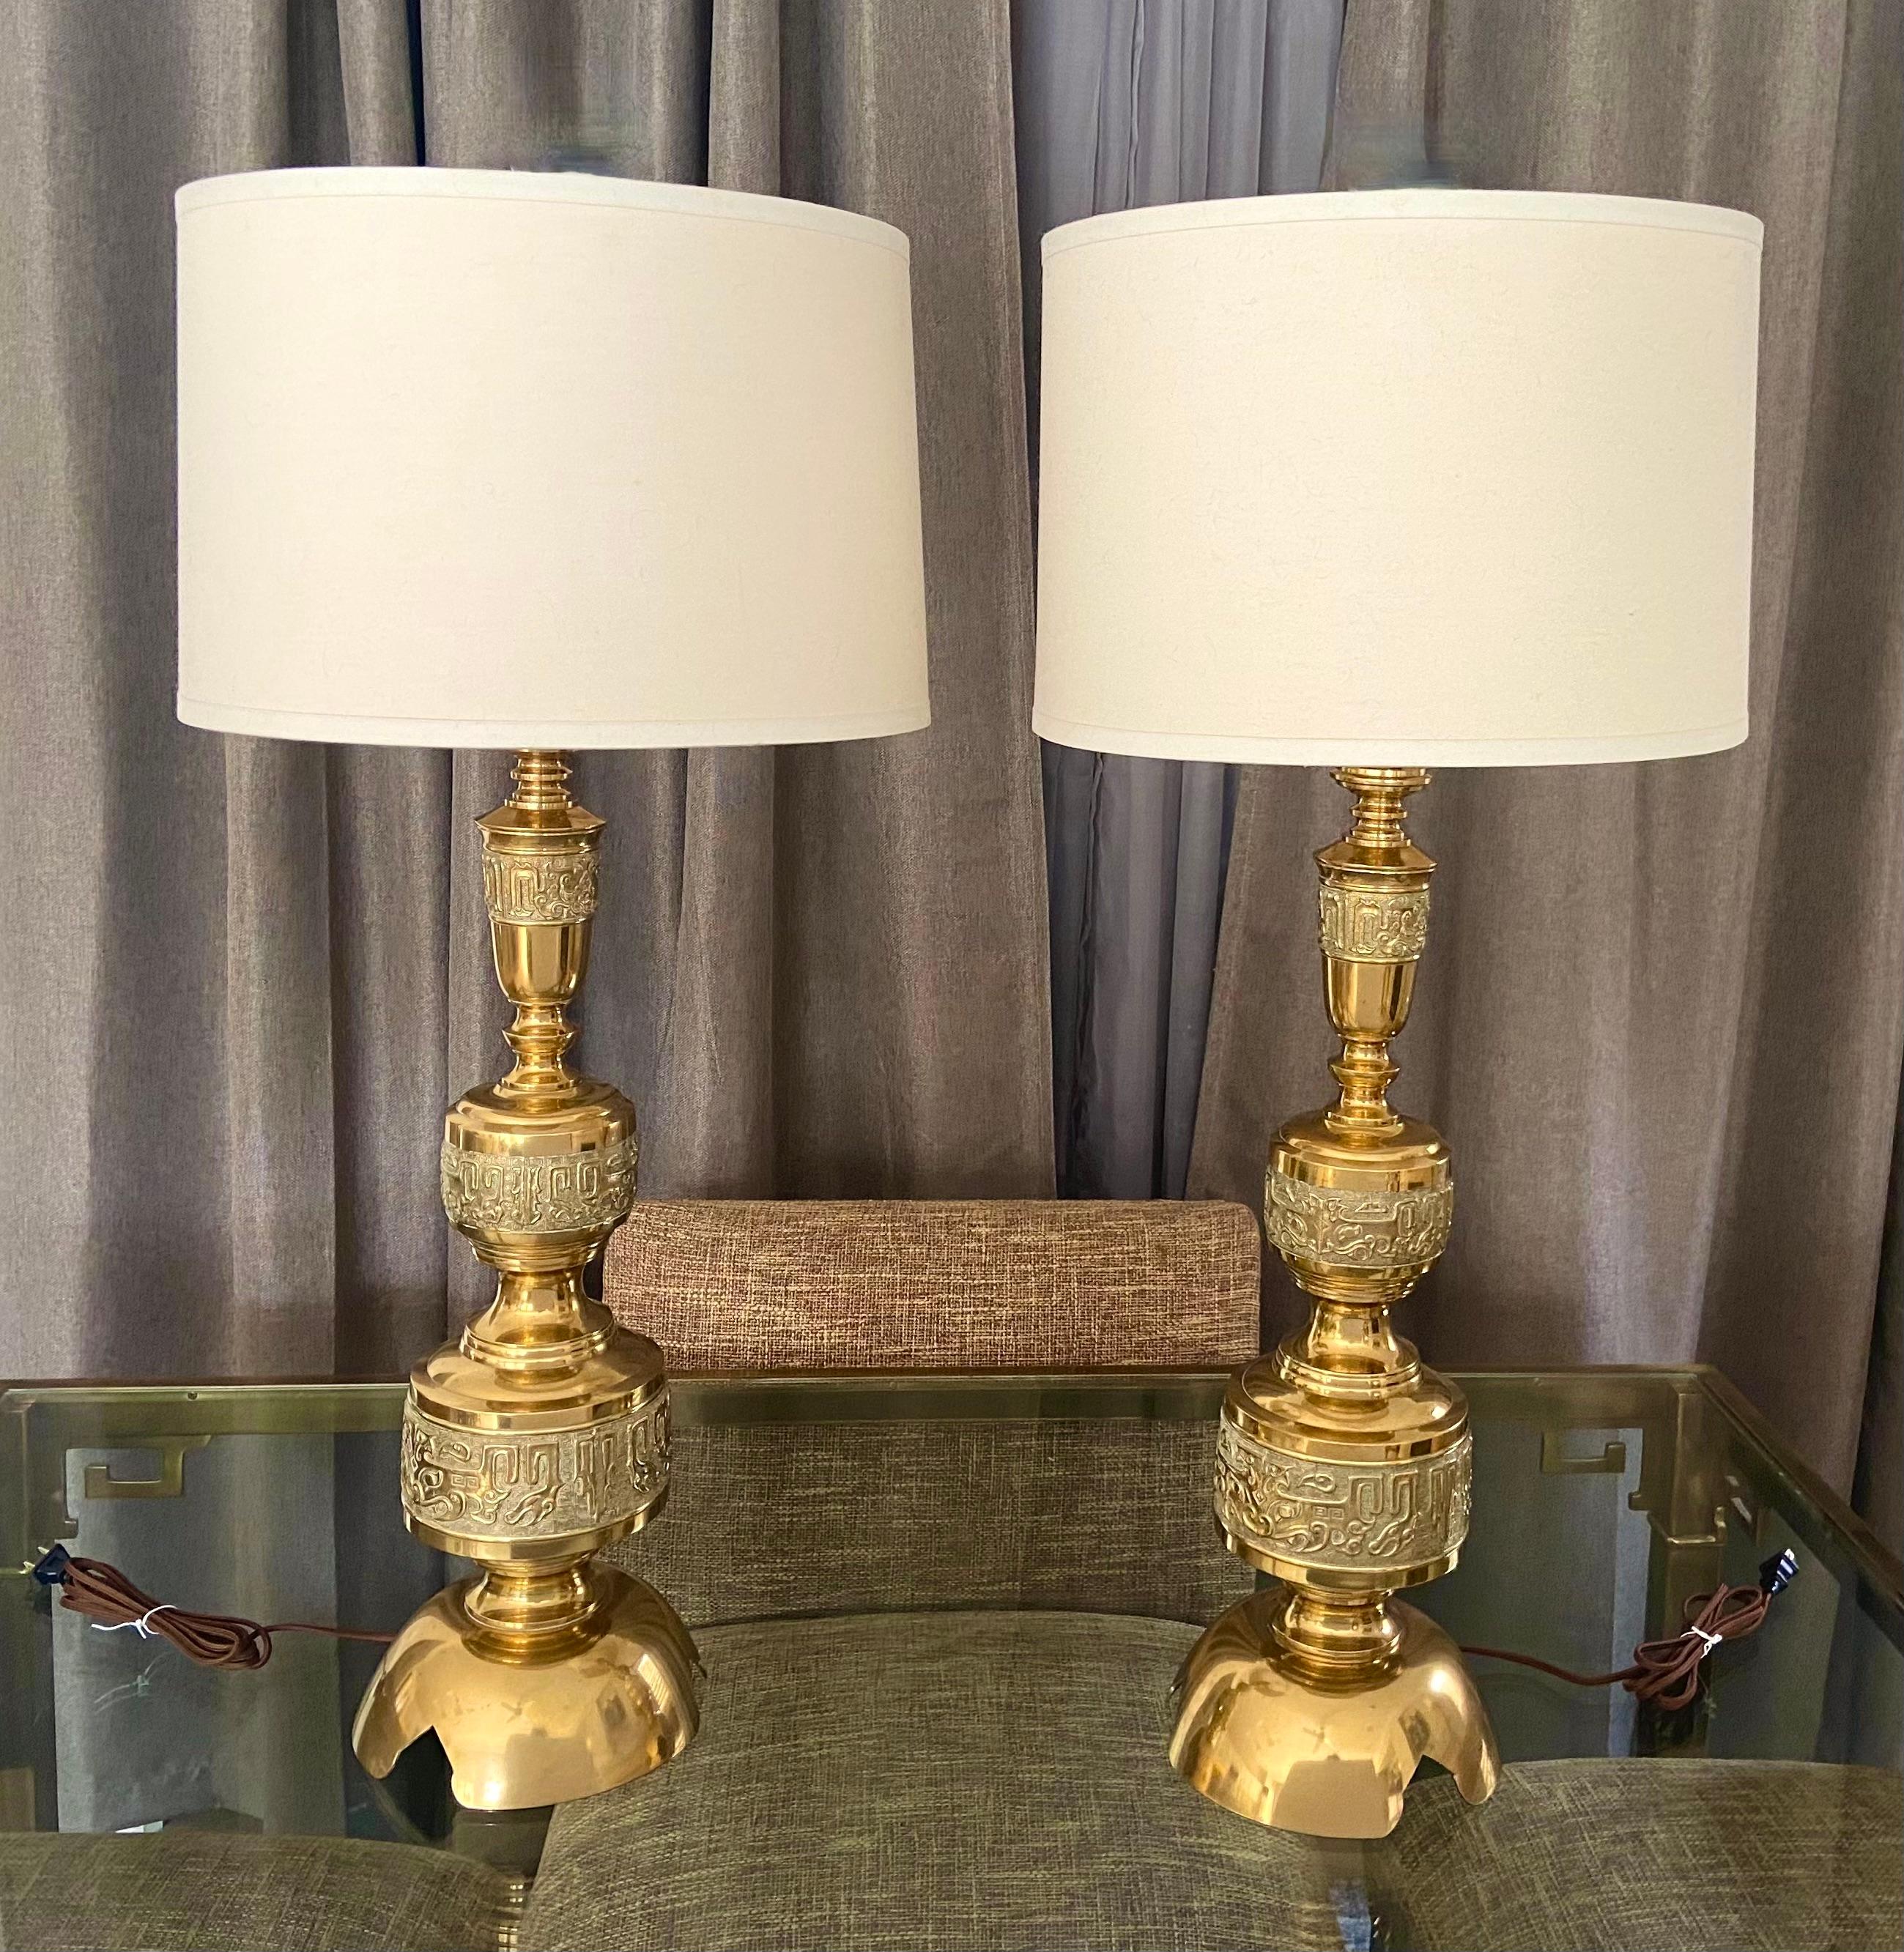 Pair of large Asian inspired brass or bronze table lamps in manner of James Mont. Newly wired for US with new three-way brass sockets and cords. Shades are not included and are shown for photography purposes only.

